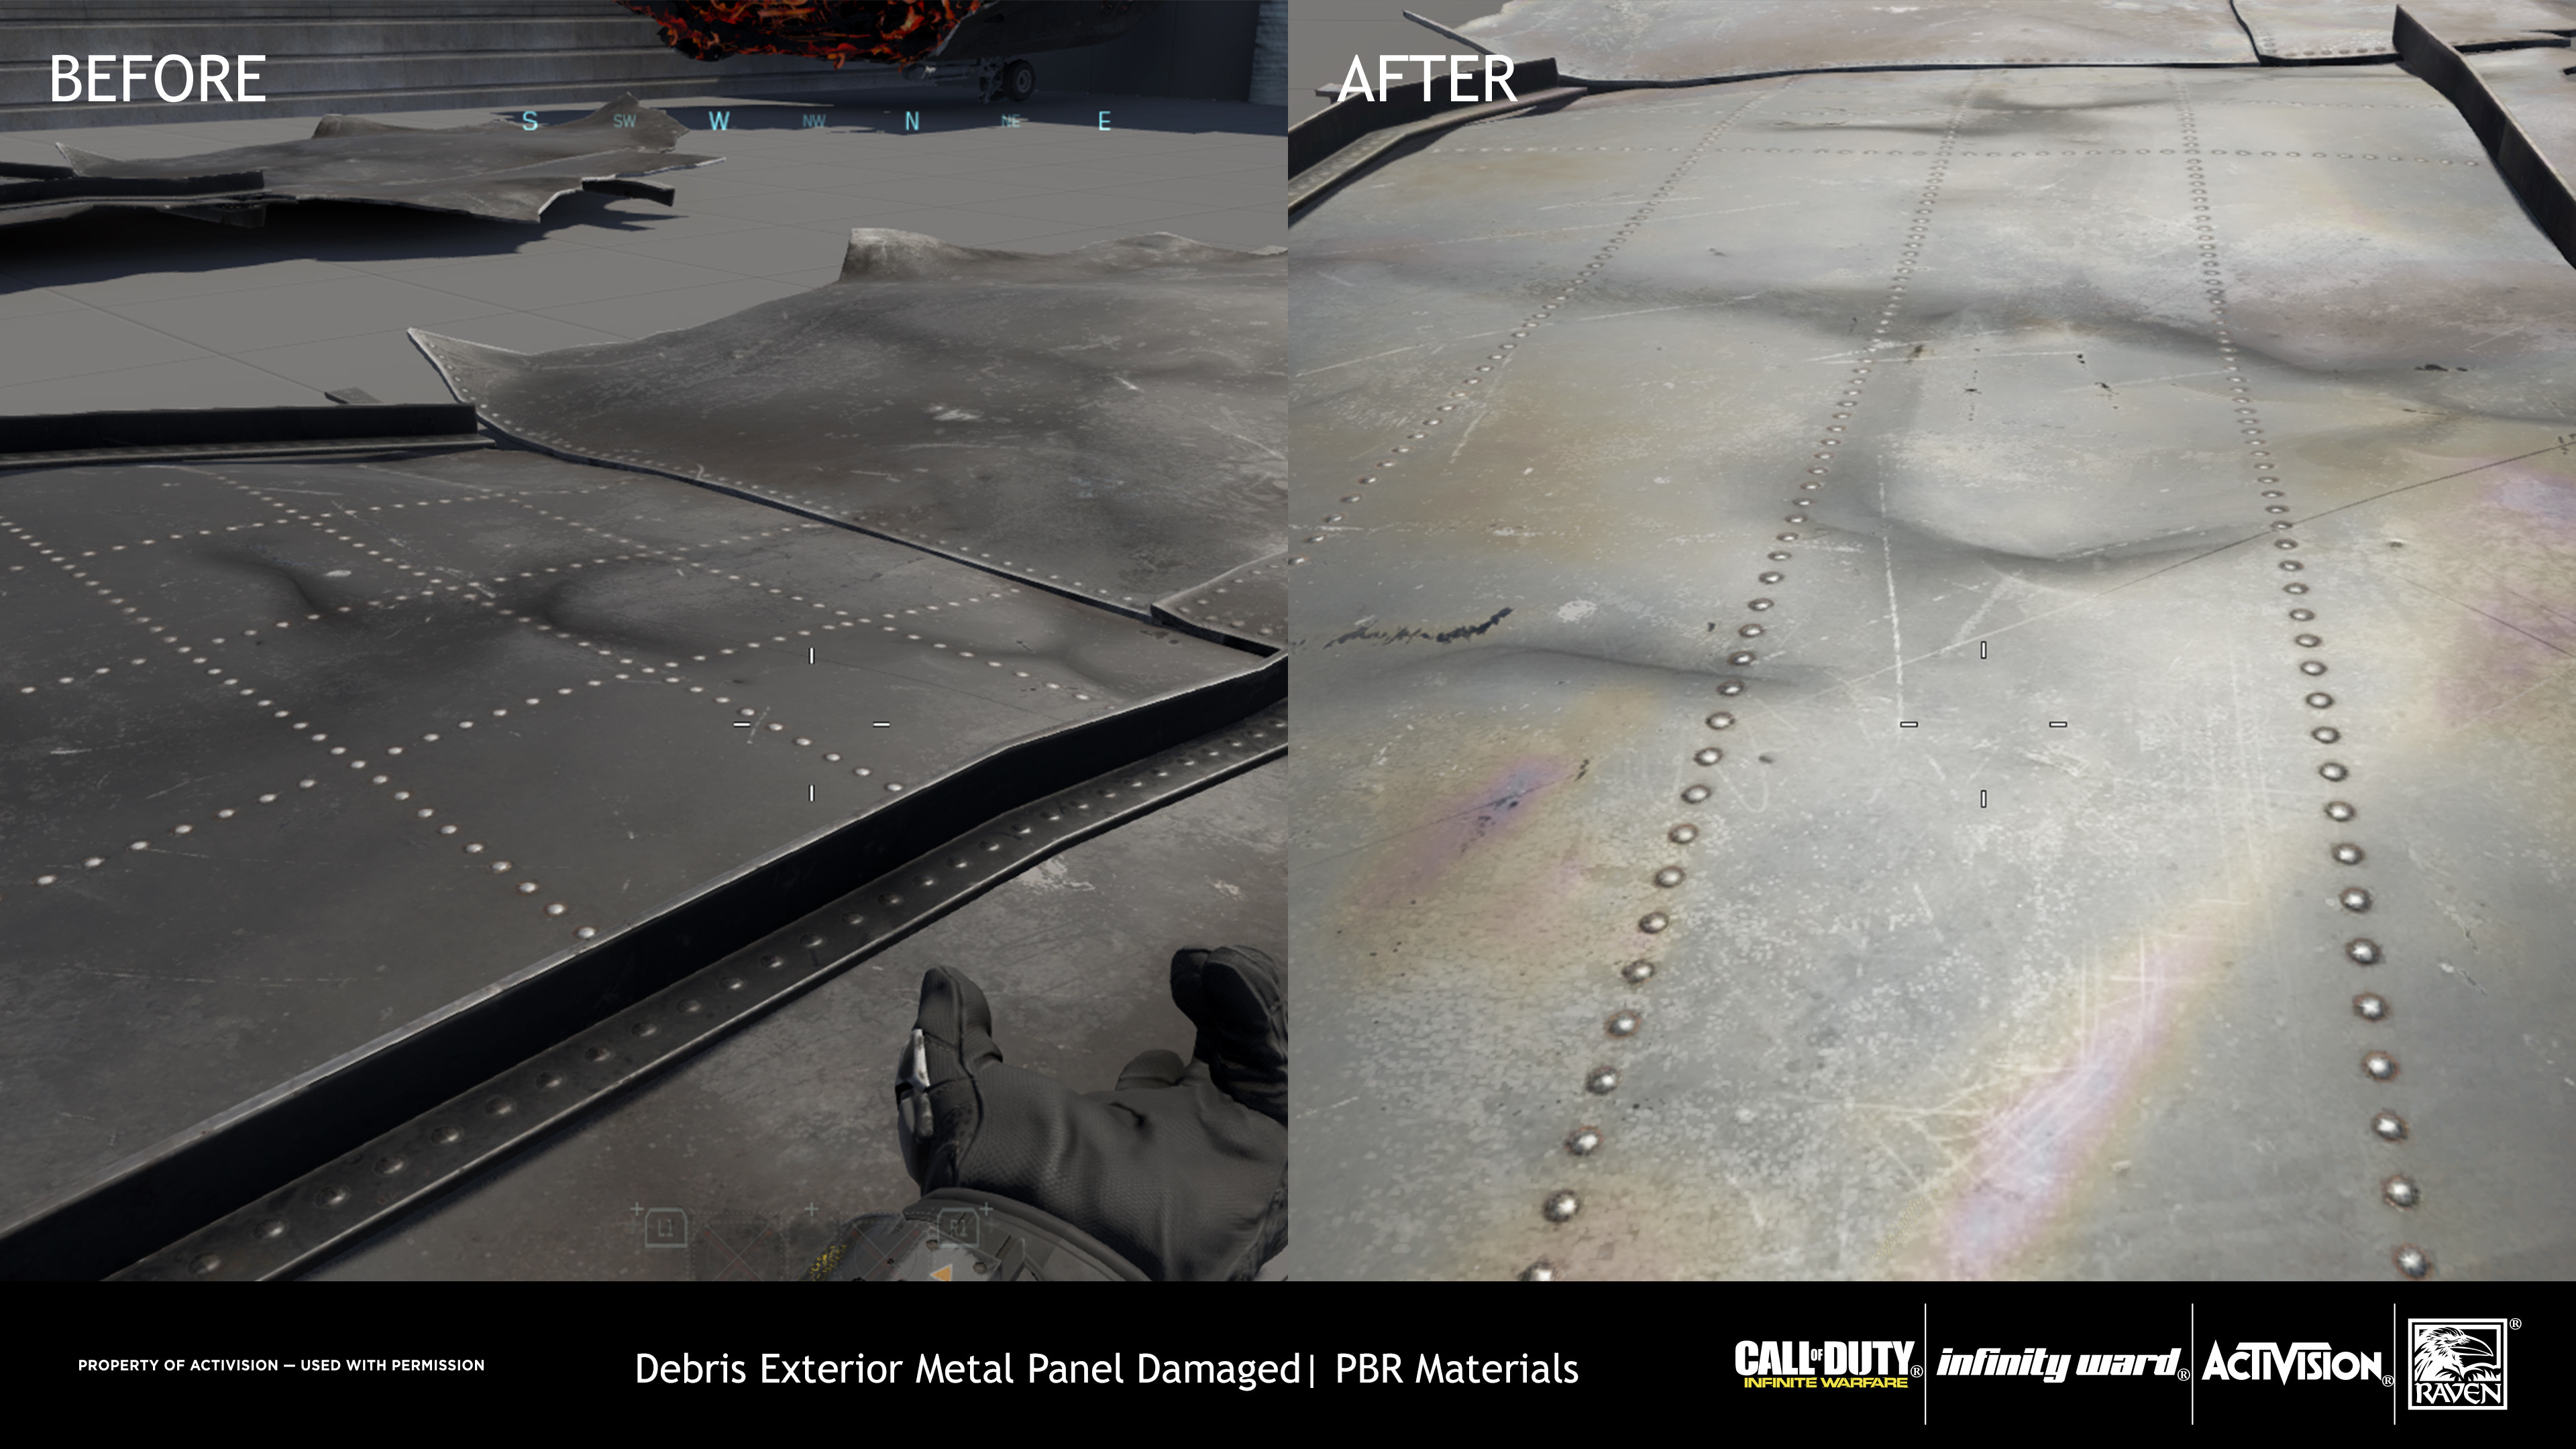 This was treated as a damaged metal were the diffuse could be at lighter value than black as well as the lowering of the specular value. Using a Specular Occlusion map generated from the Normal map, a mask for the Iridescence shader was applied.